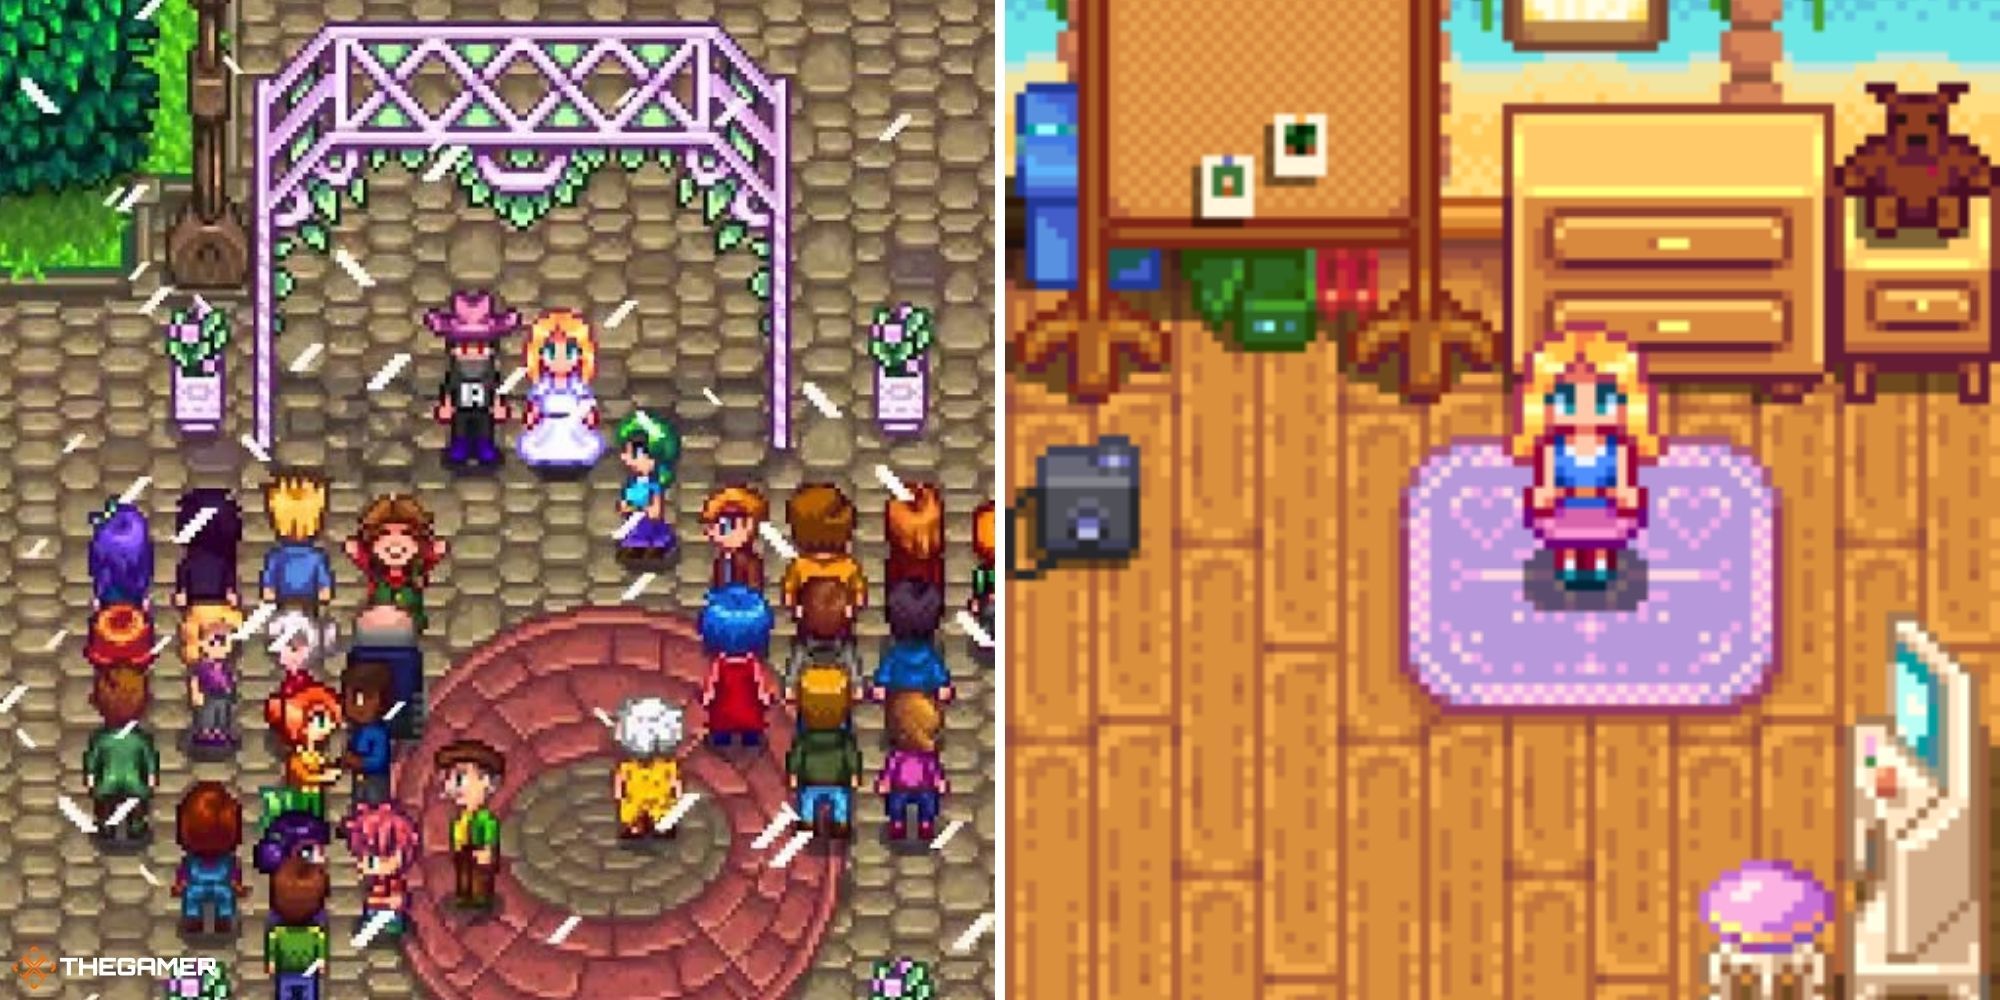 Couldn't find Haley's bracelet, I think Elliot stole it 😐 : r/StardewValley